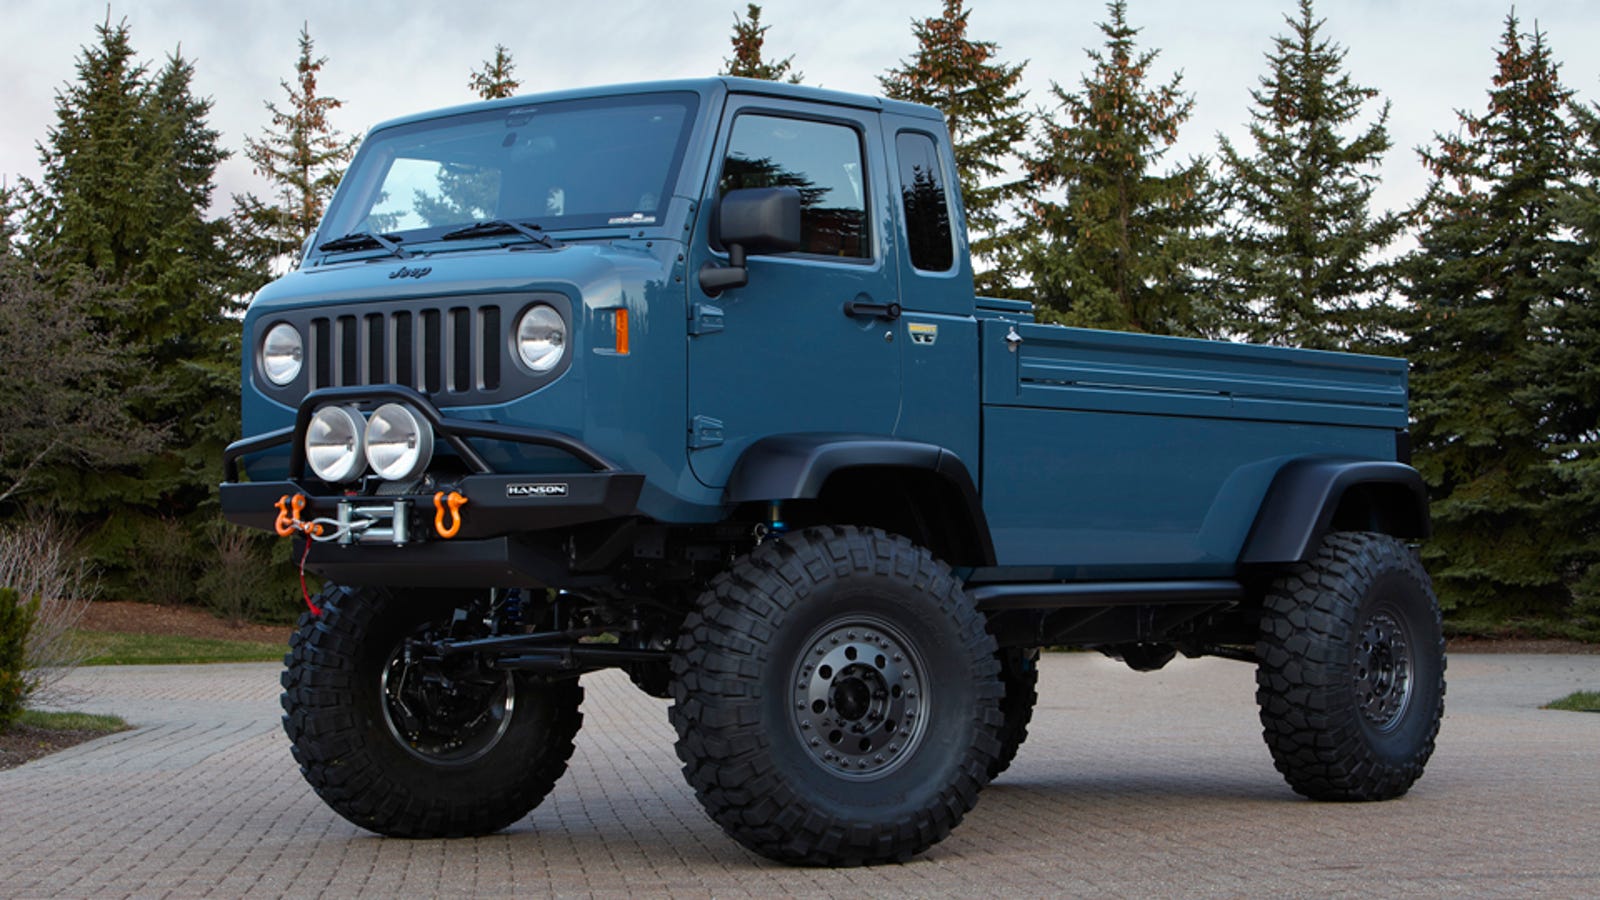 Jeep Must Build This Forward Control Concept